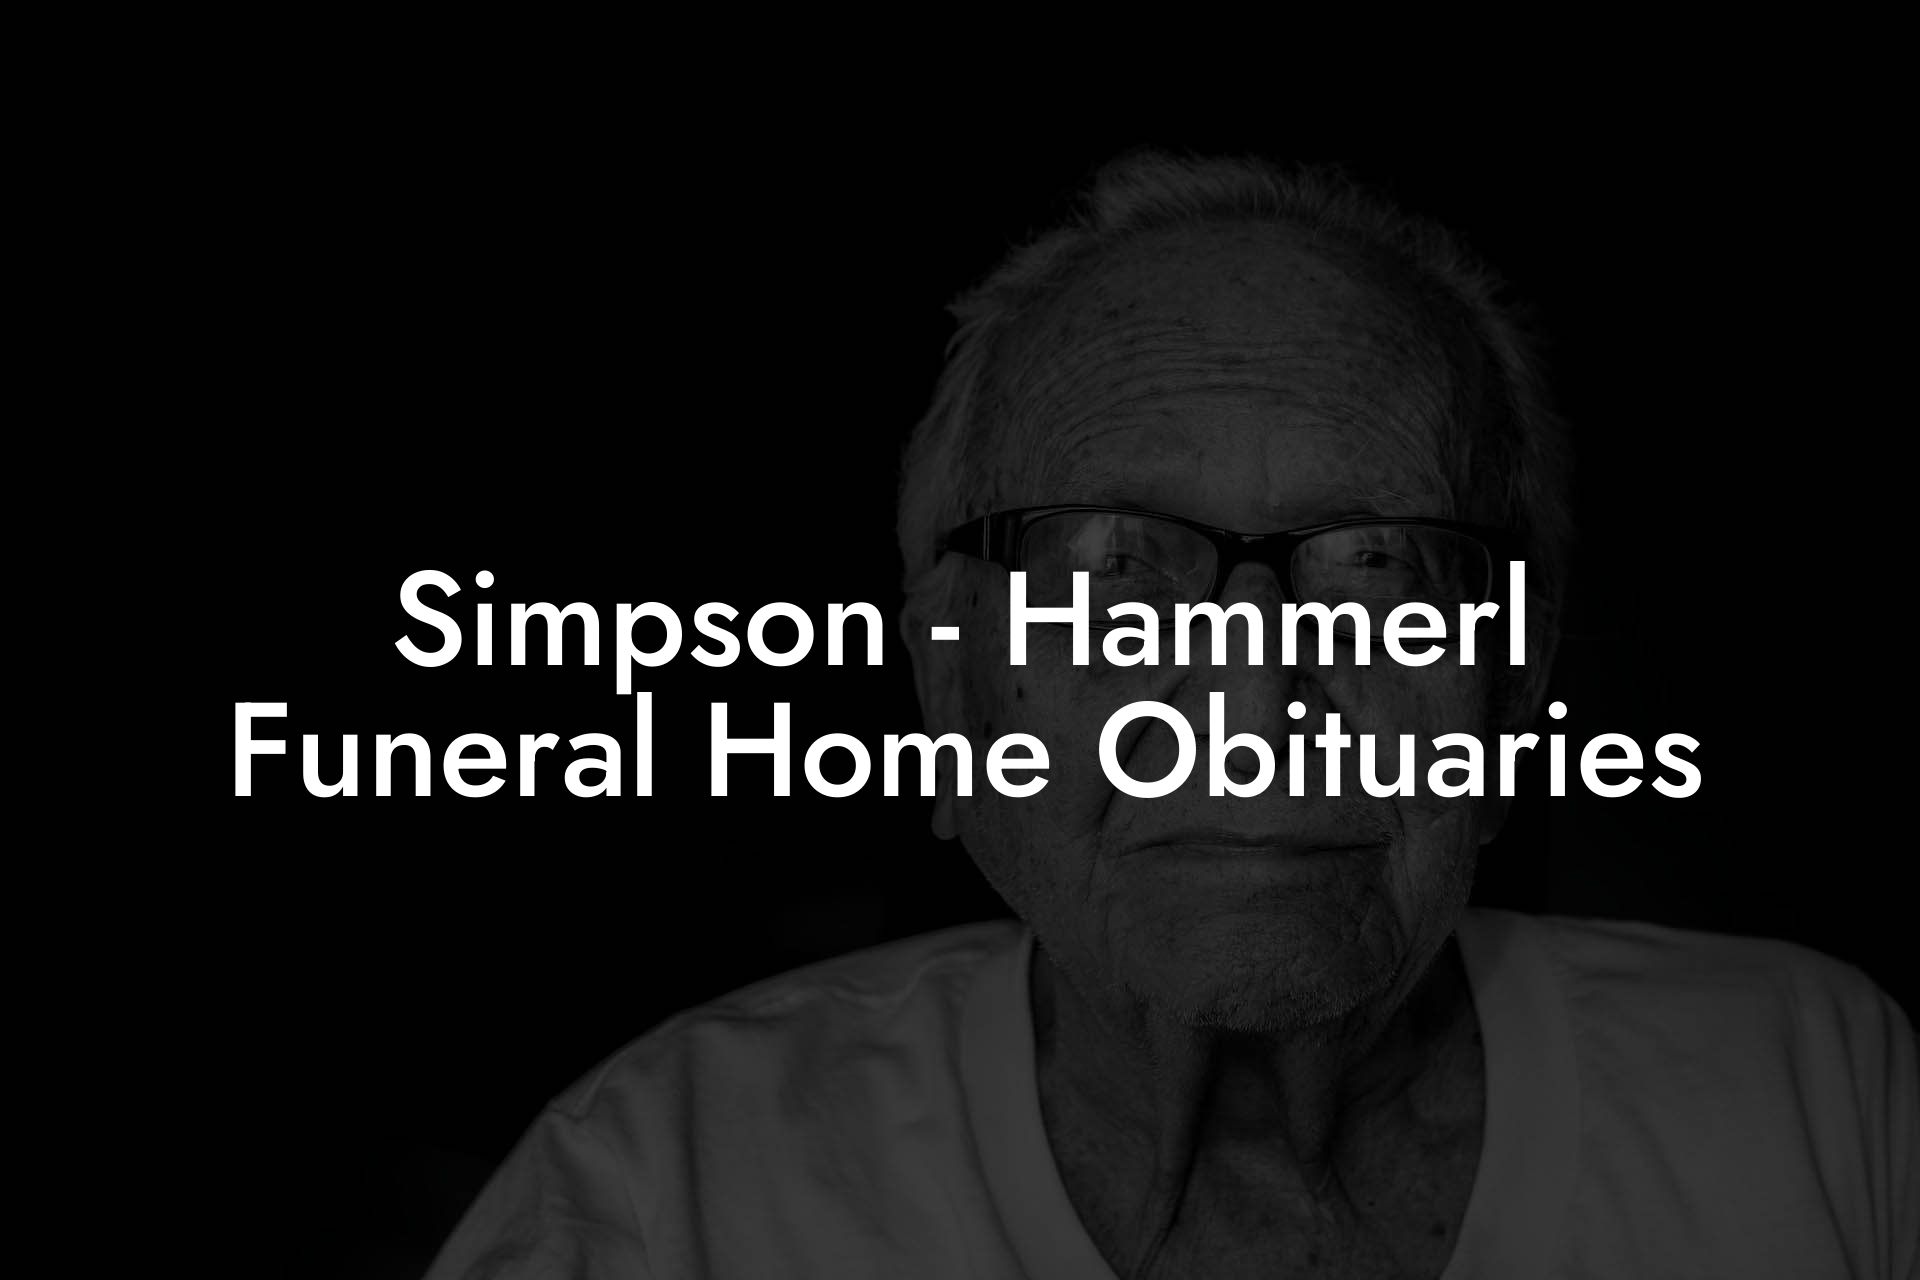 Simpson - Hammerl Funeral Home Obituaries